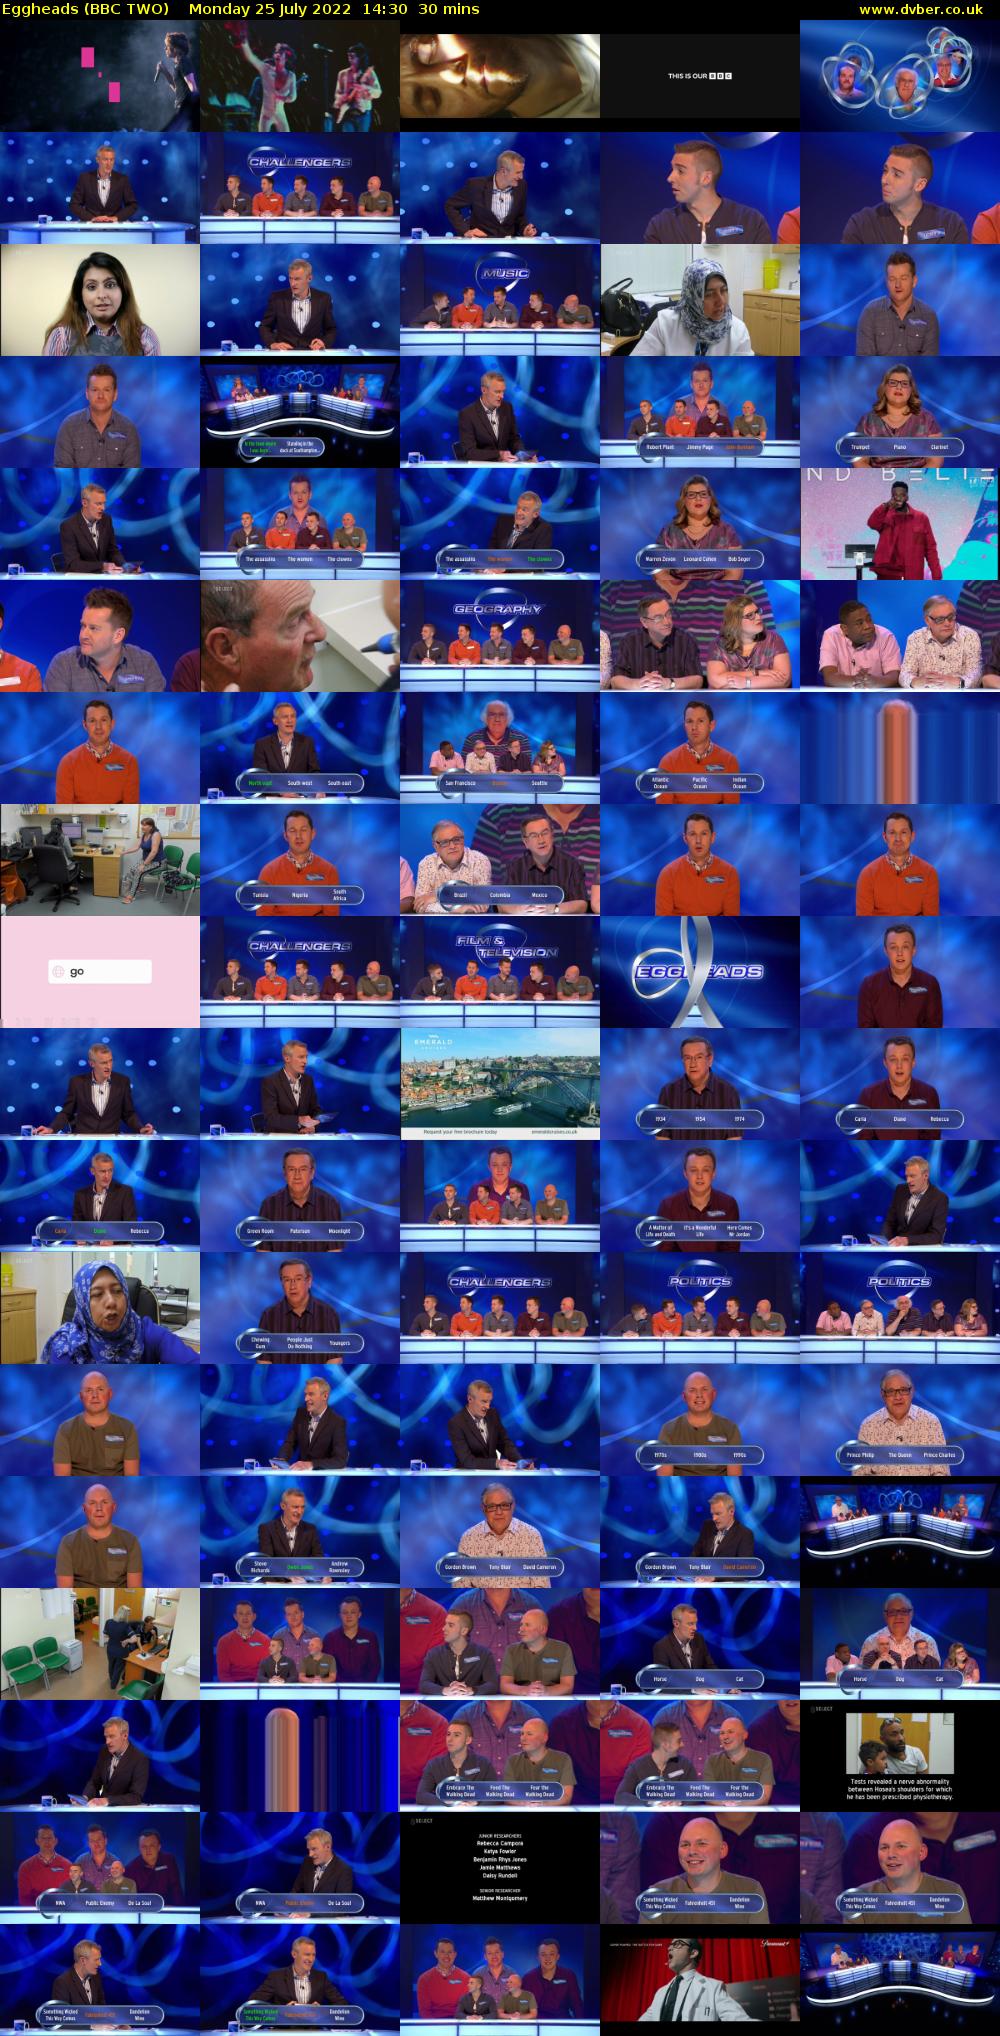 Eggheads (BBC TWO) Monday 25 July 2022 14:30 - 15:00